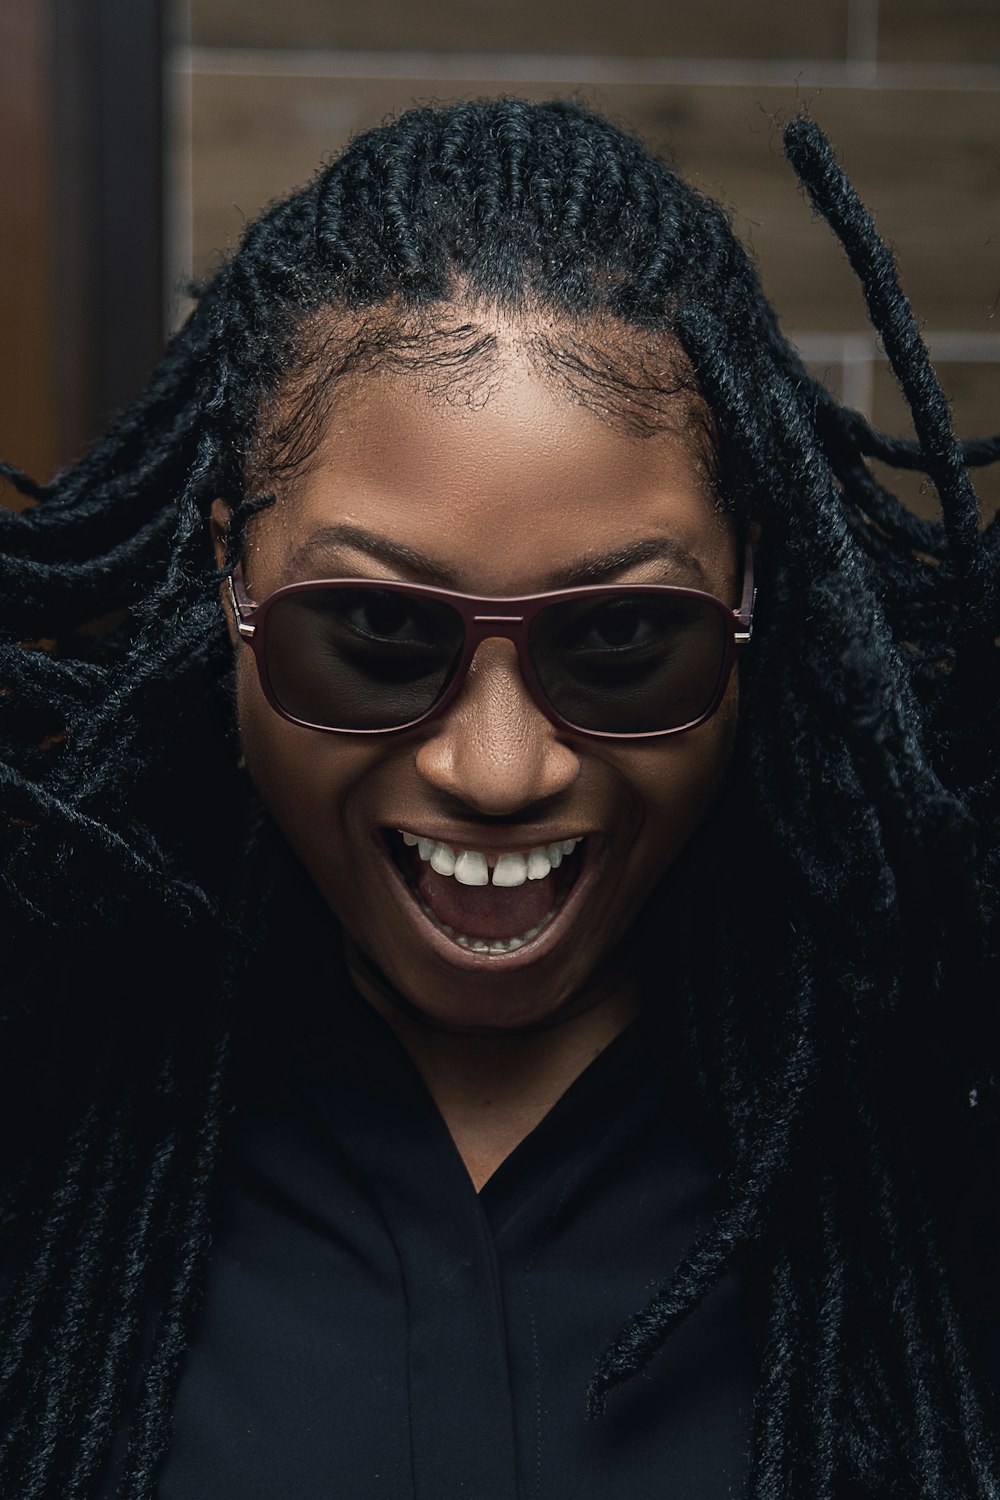 a woman with dreadlocks and a black shirt